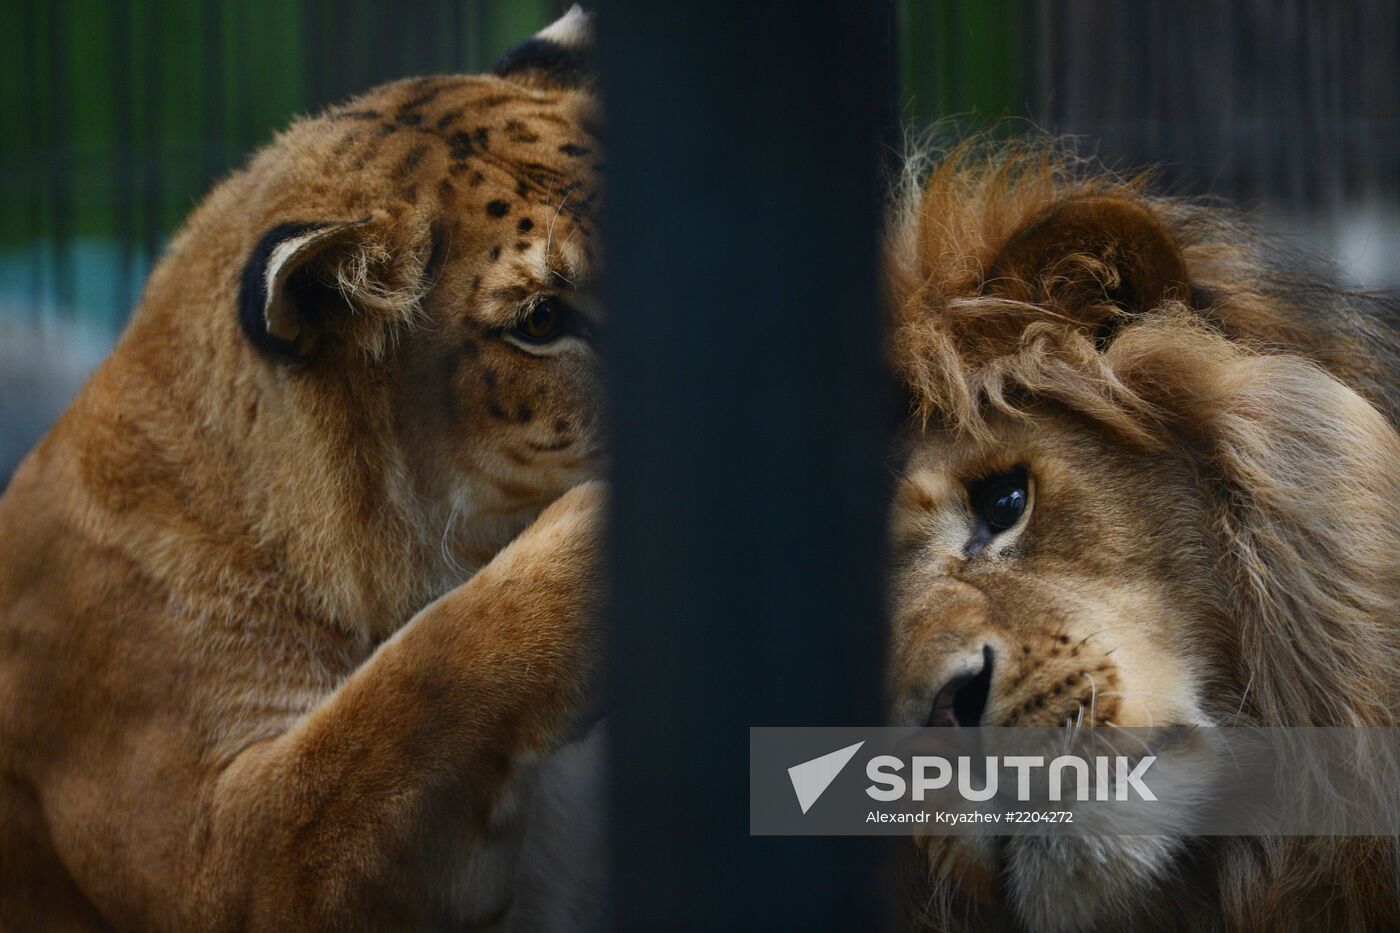 Ligress shows her cubs to visitors in Novosibirsk Zoo